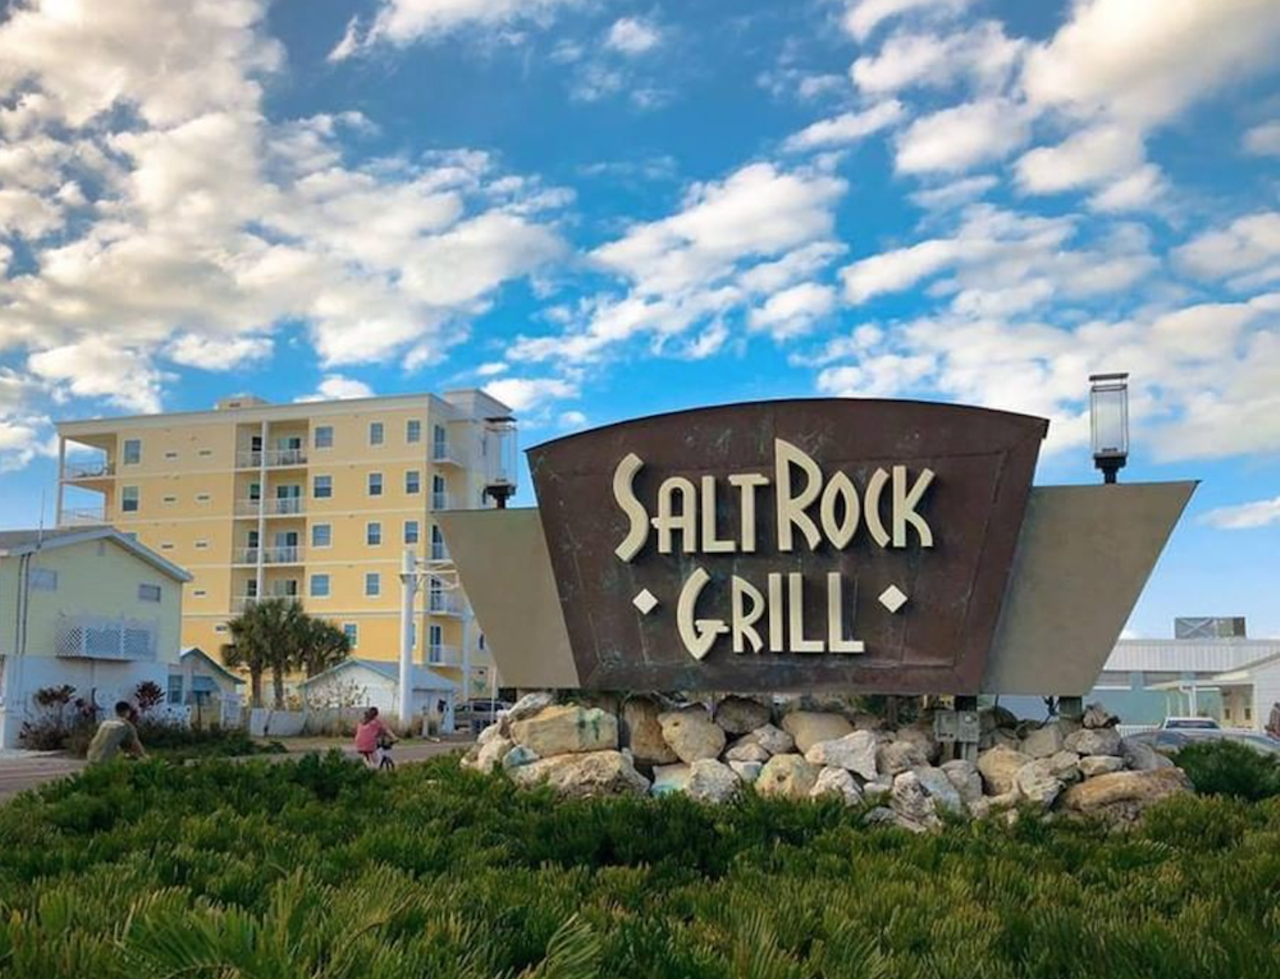 24. Salt Rock Grill
19325 Gulf Blvd., Indian Shores, 727-593-7625
“This restaurant exceeded our expectations. The bartender made strong drinks, the food tasted fantastic, and the service was phenomenal. This is a breathtakingly beautiful restaurant on the water with plenty of outdoor seating as well as indoor seating. One of the highlights here is that as you are walking outside there is a glass floor that you can see downstairs into another wine cellar. We thoroughly enjoy this place and look forward to returning!” -Melissa S.
Photo via Salt Rock Grill/Instagram